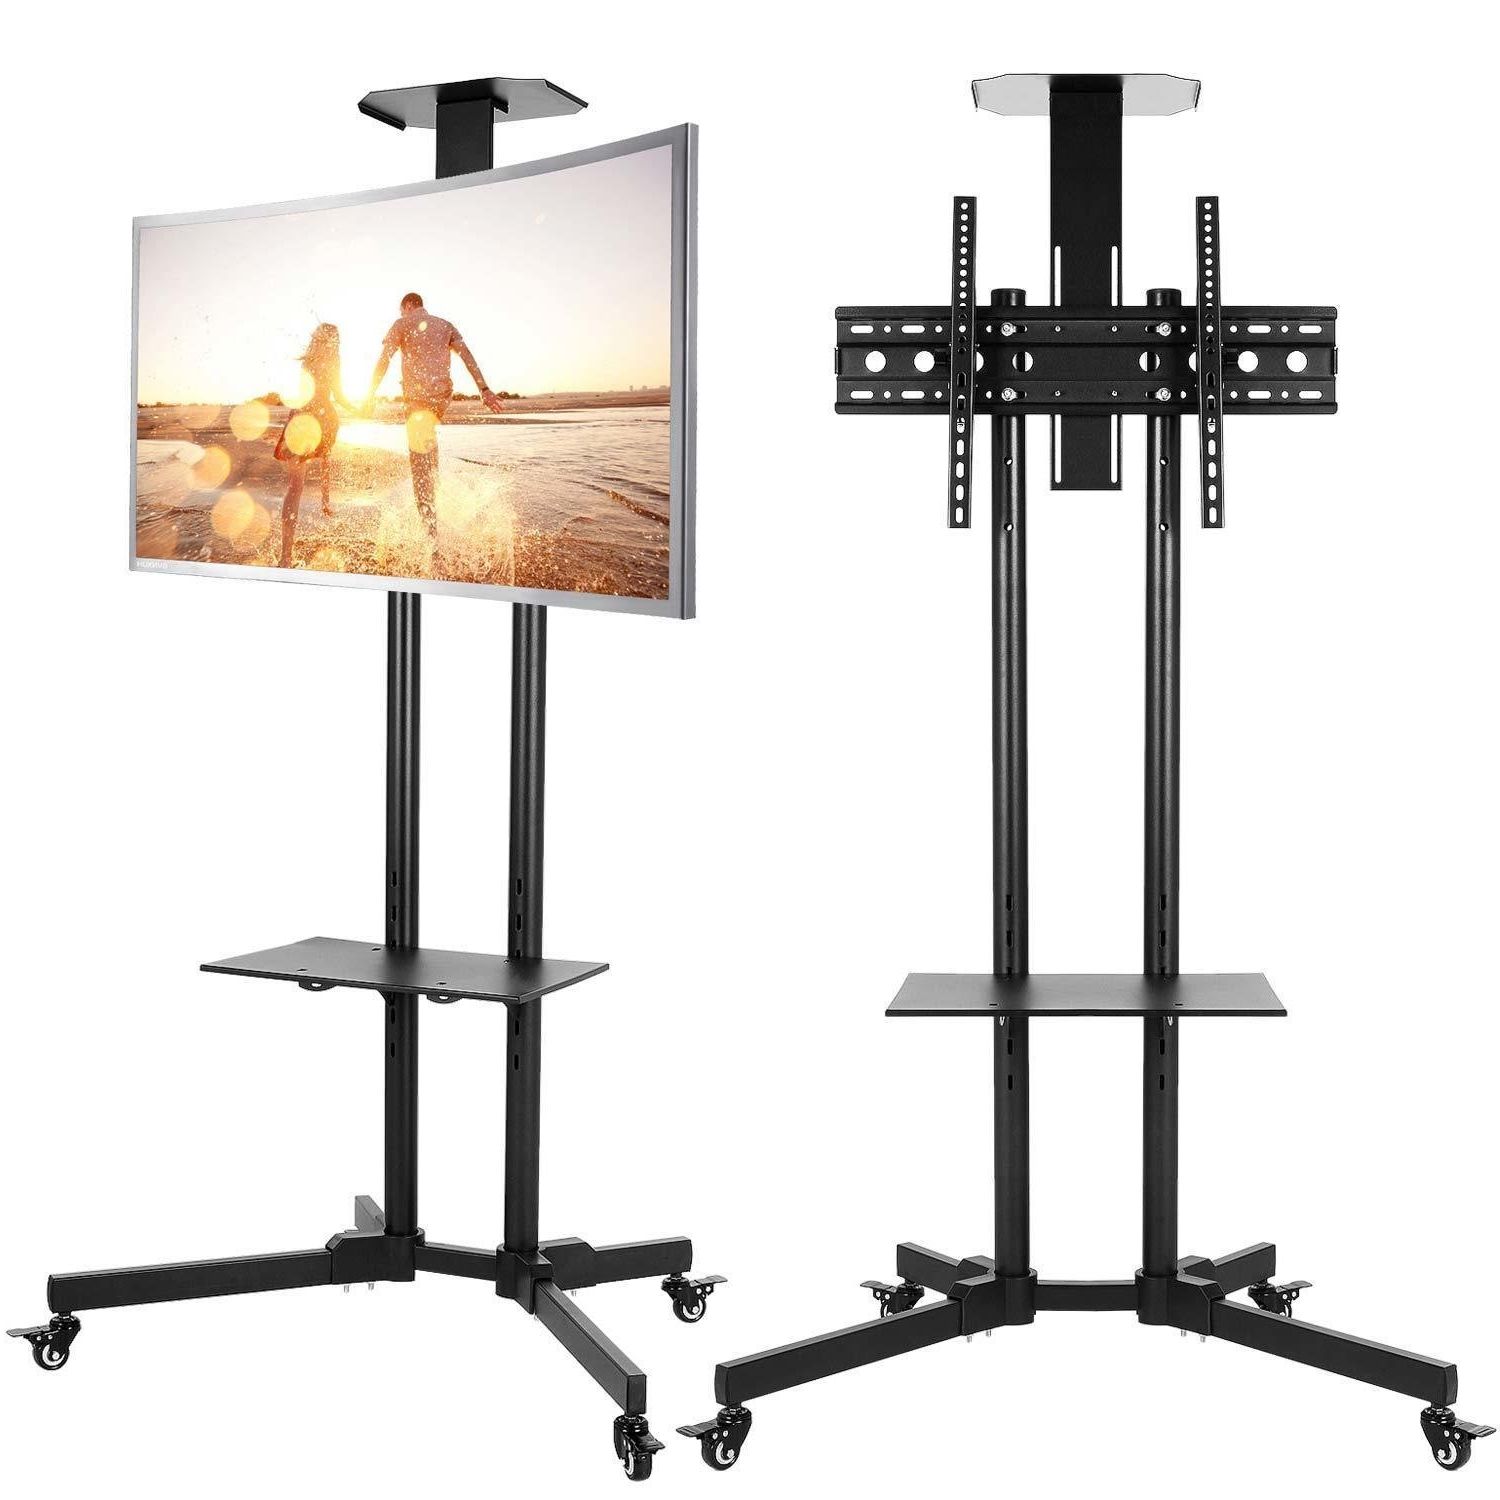 Trendy Buy Portable Tv Stand With Wheels For Lcd, Plasma Or Led With Regard To Rolling Tv Stands With Wheels With Adjustable Metal Shelf (View 4 of 10)